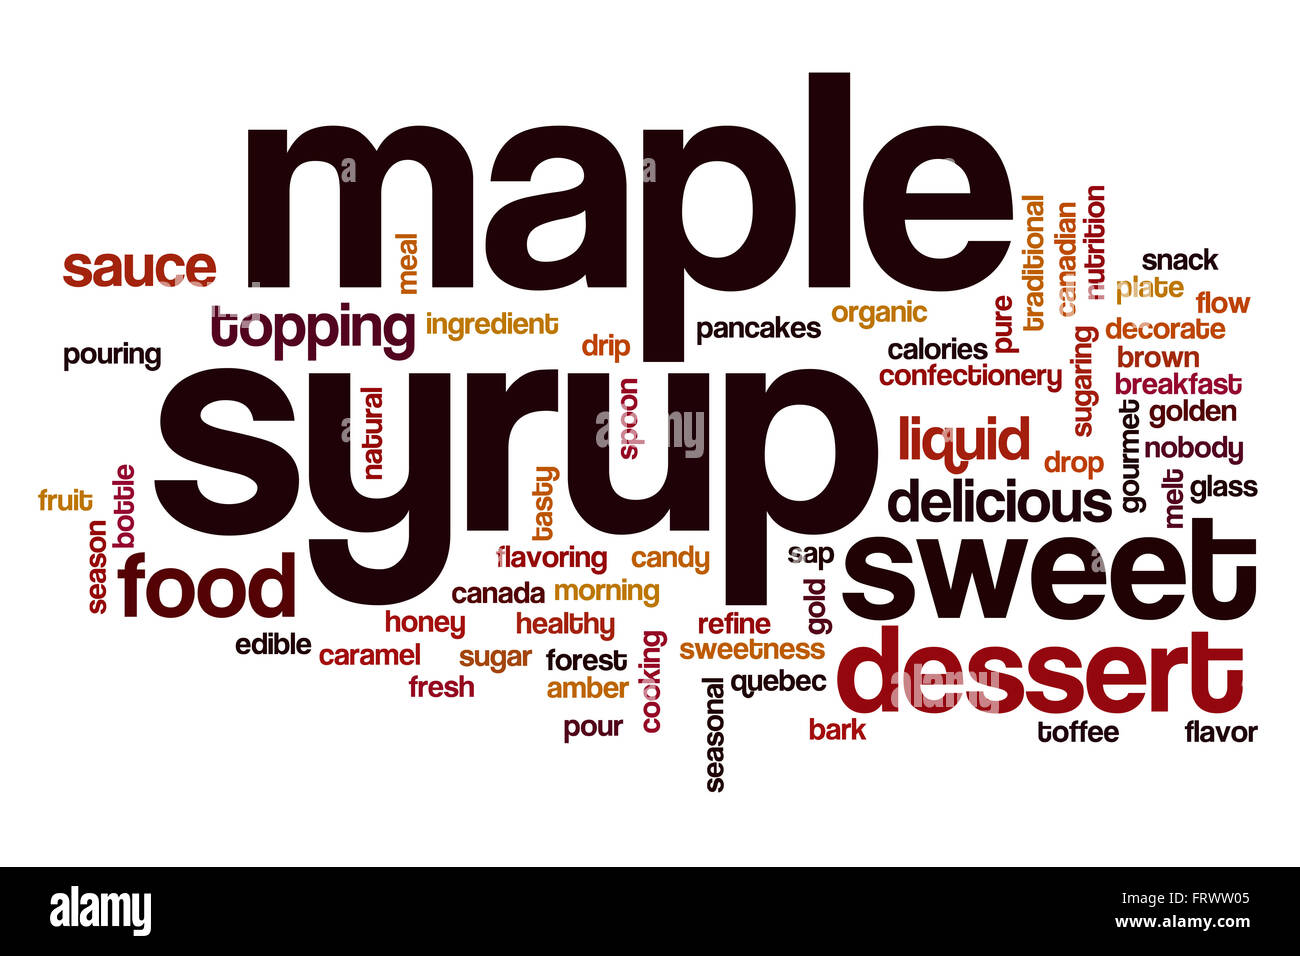 Maple syrup word cloud Stock Photo